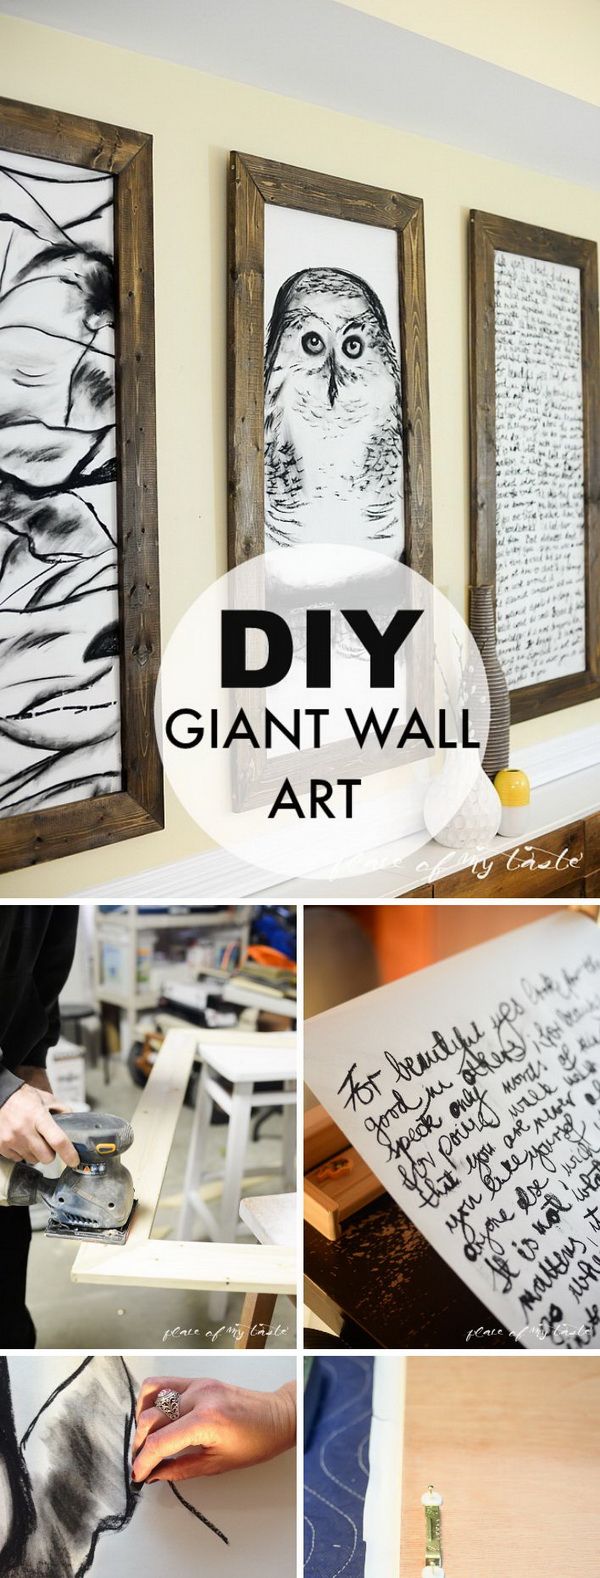 40 Rustic Wall Decor Diy Ideas 2017 With Regard To Current Peace I Leave With You Wall Hangings (View 19 of 20)